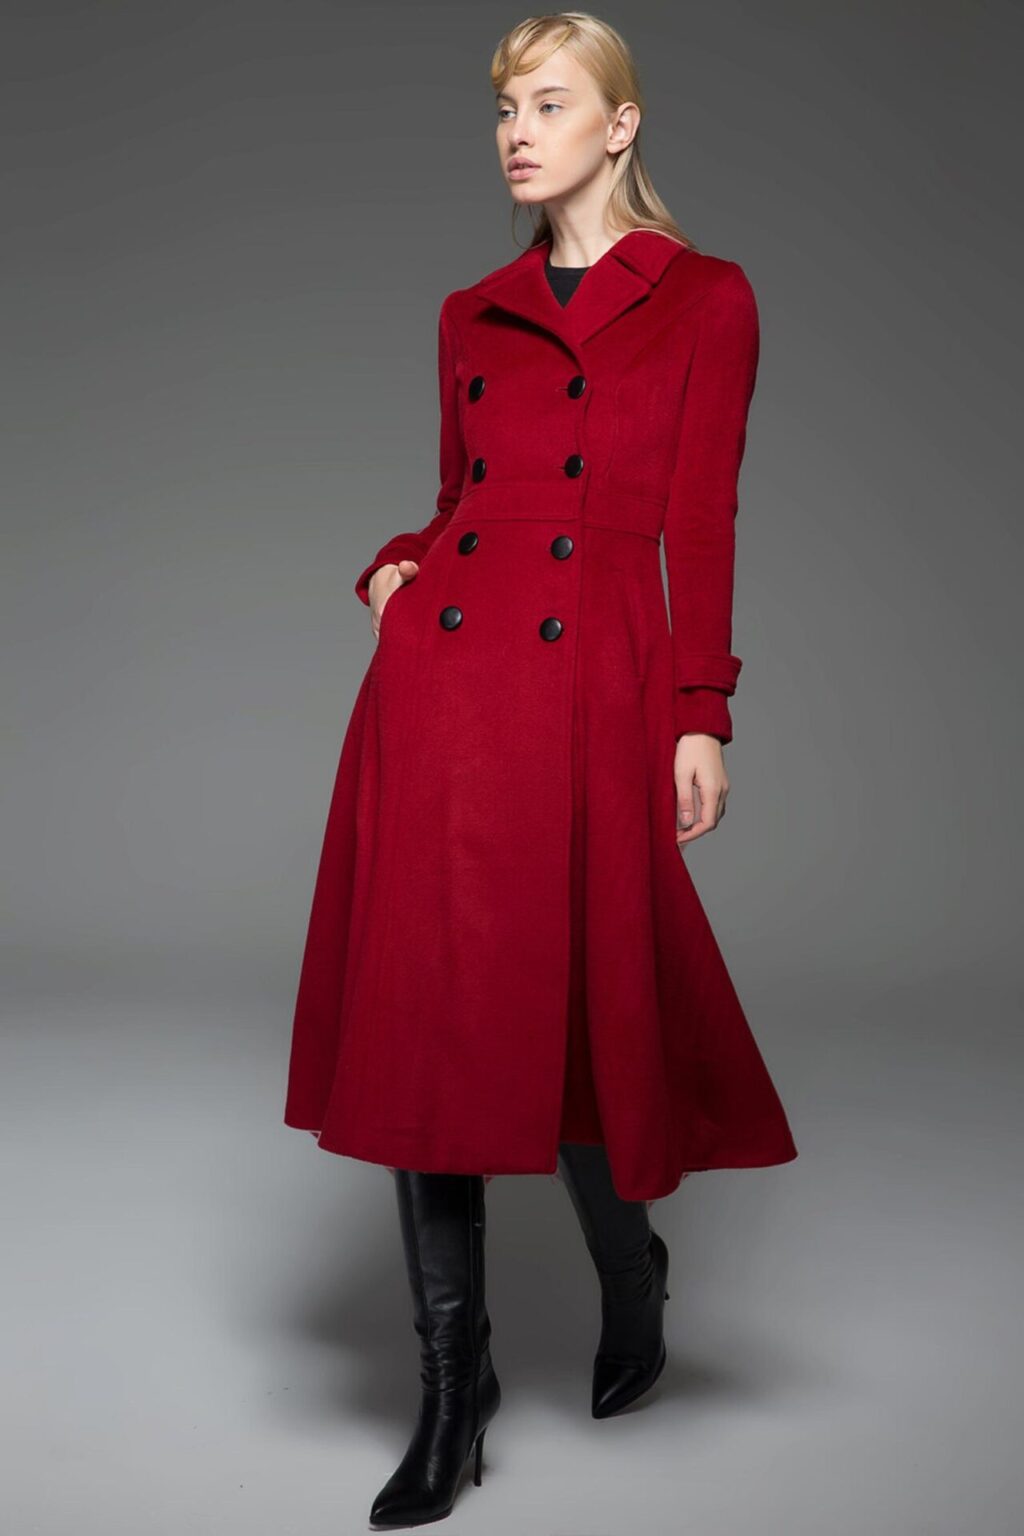 Kate Middleton in Red Alexander McQueen Coat for Photo Exhibit Launch ...